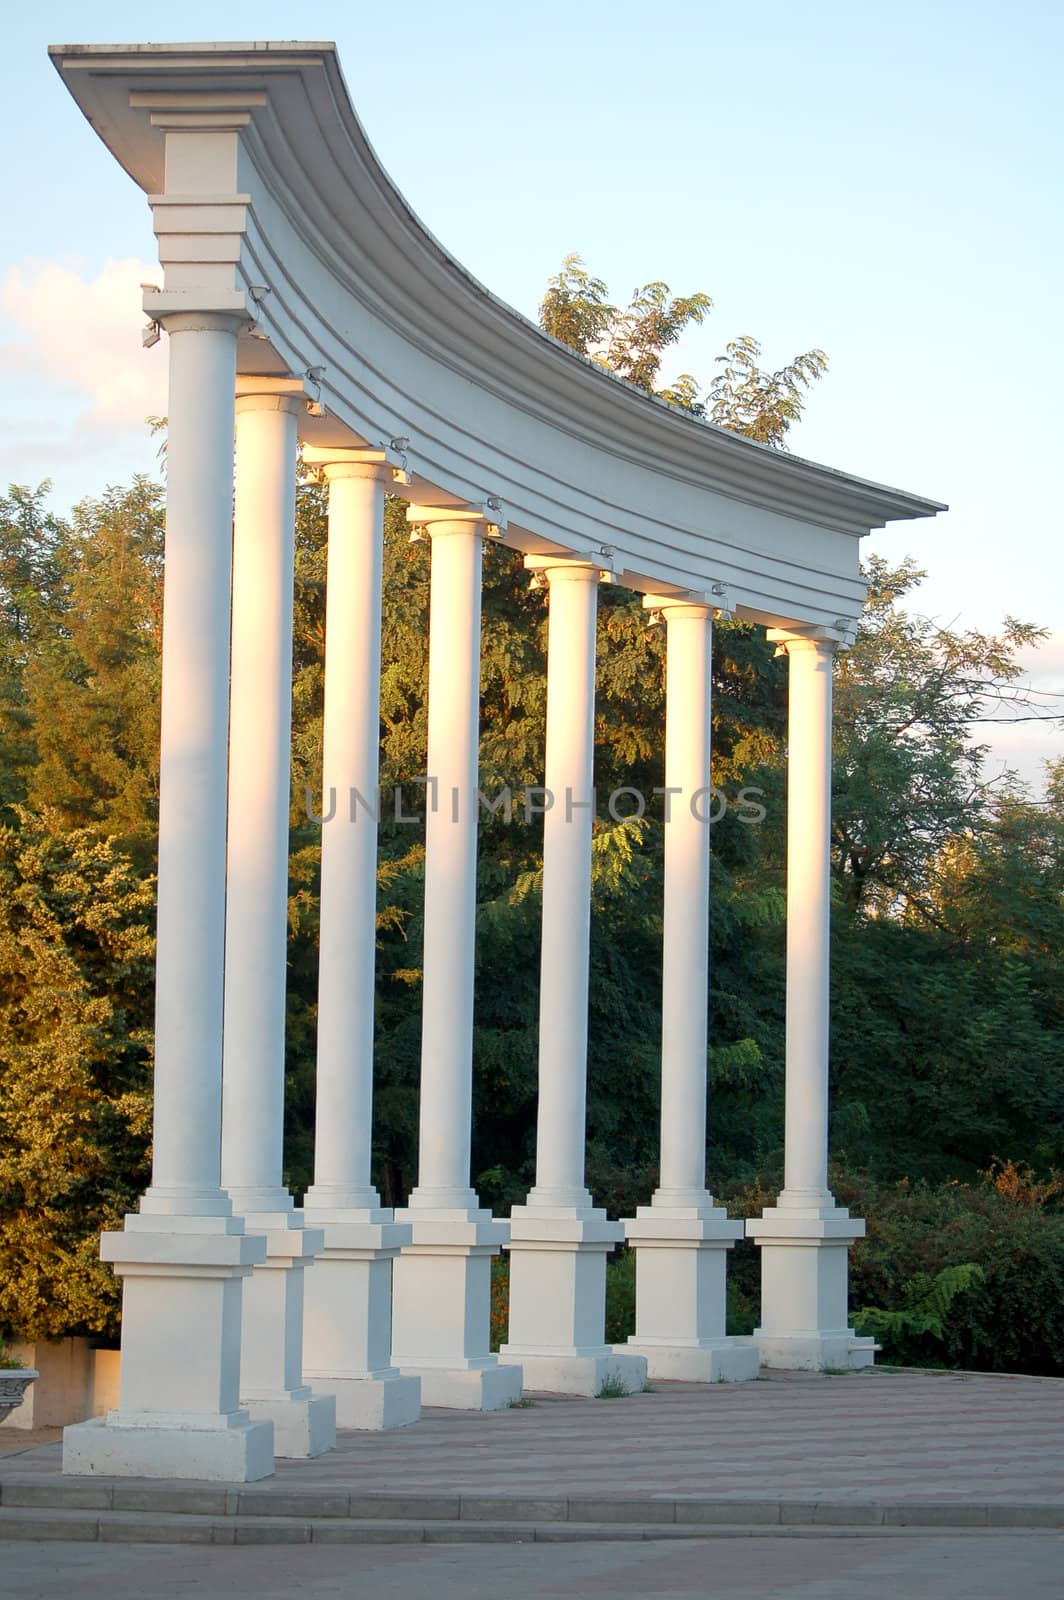 Row of Columns; architectural details of monument